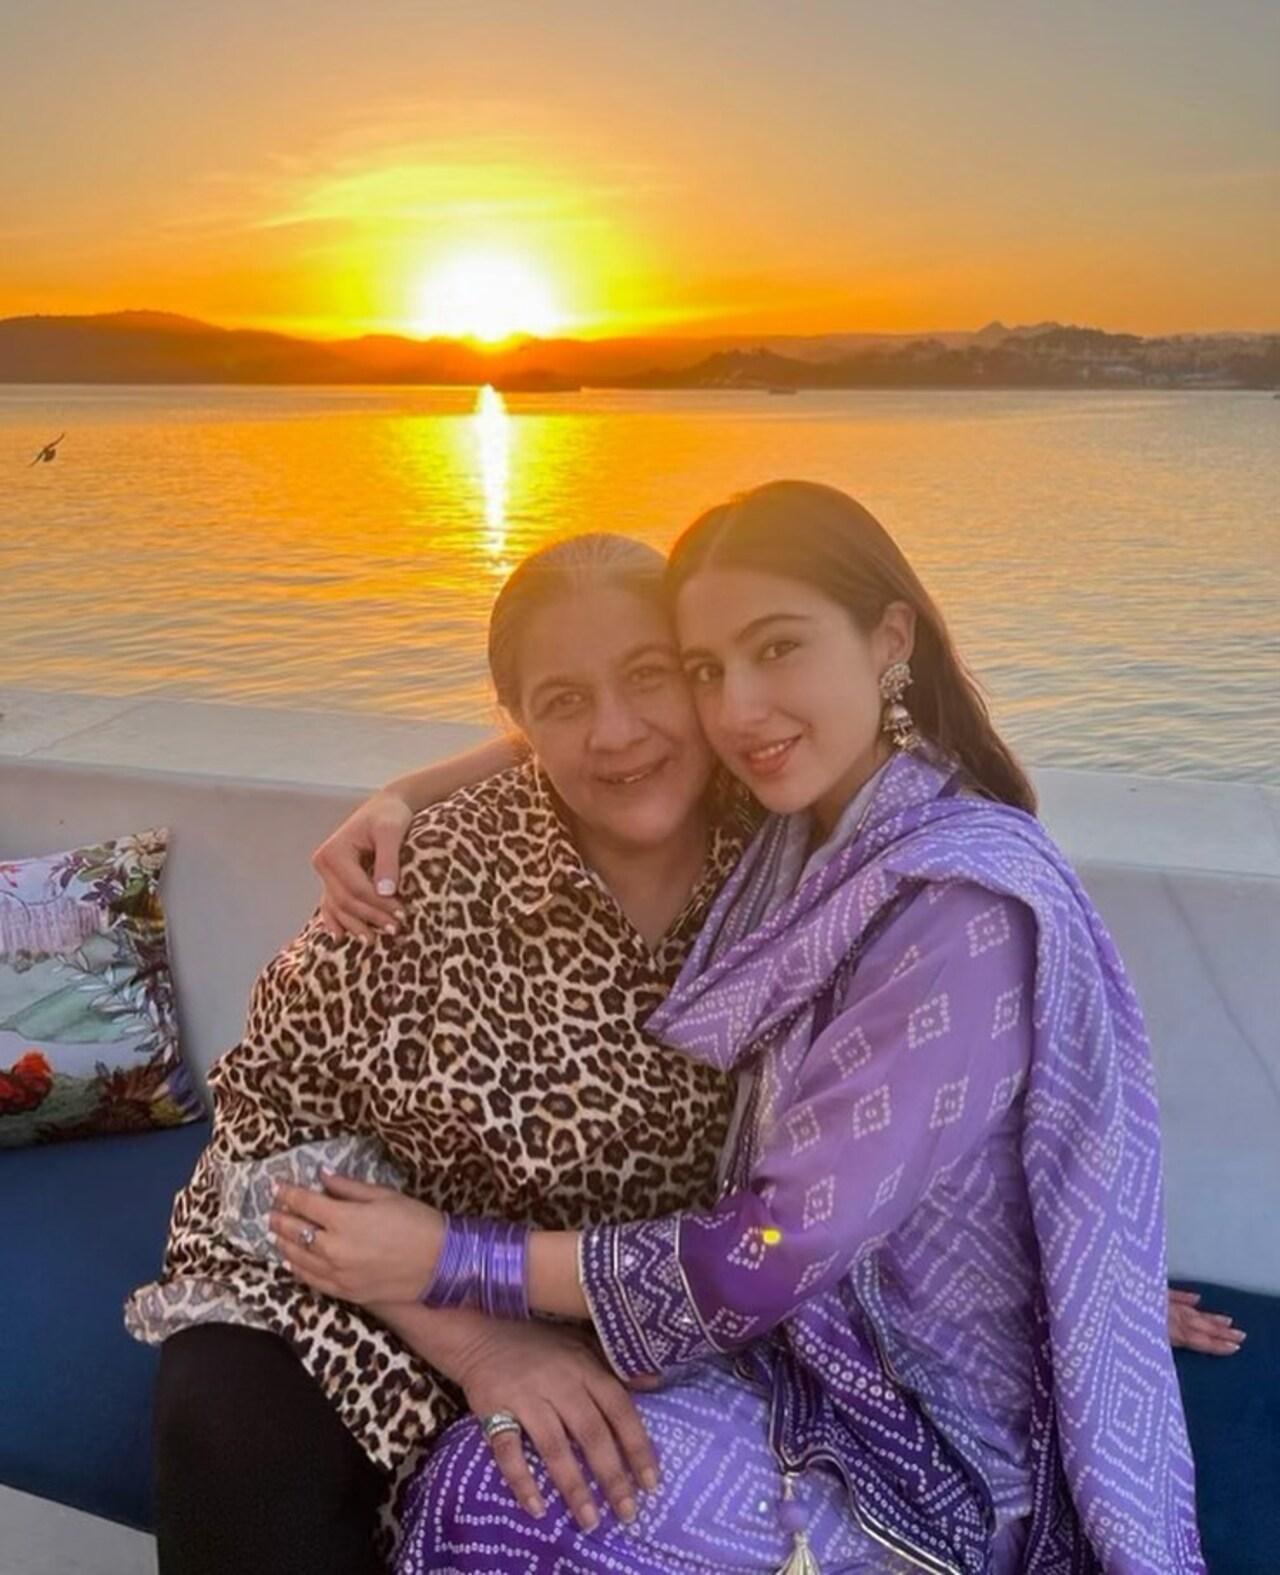 Sara Ali Khan enjoys travelling and her Instagram feed is proof. From exploring new cultures and cuisines to interacting with new people, the actress indulges in it all when not shooting. Quite often she is accompanied by her mother Amrita Singh